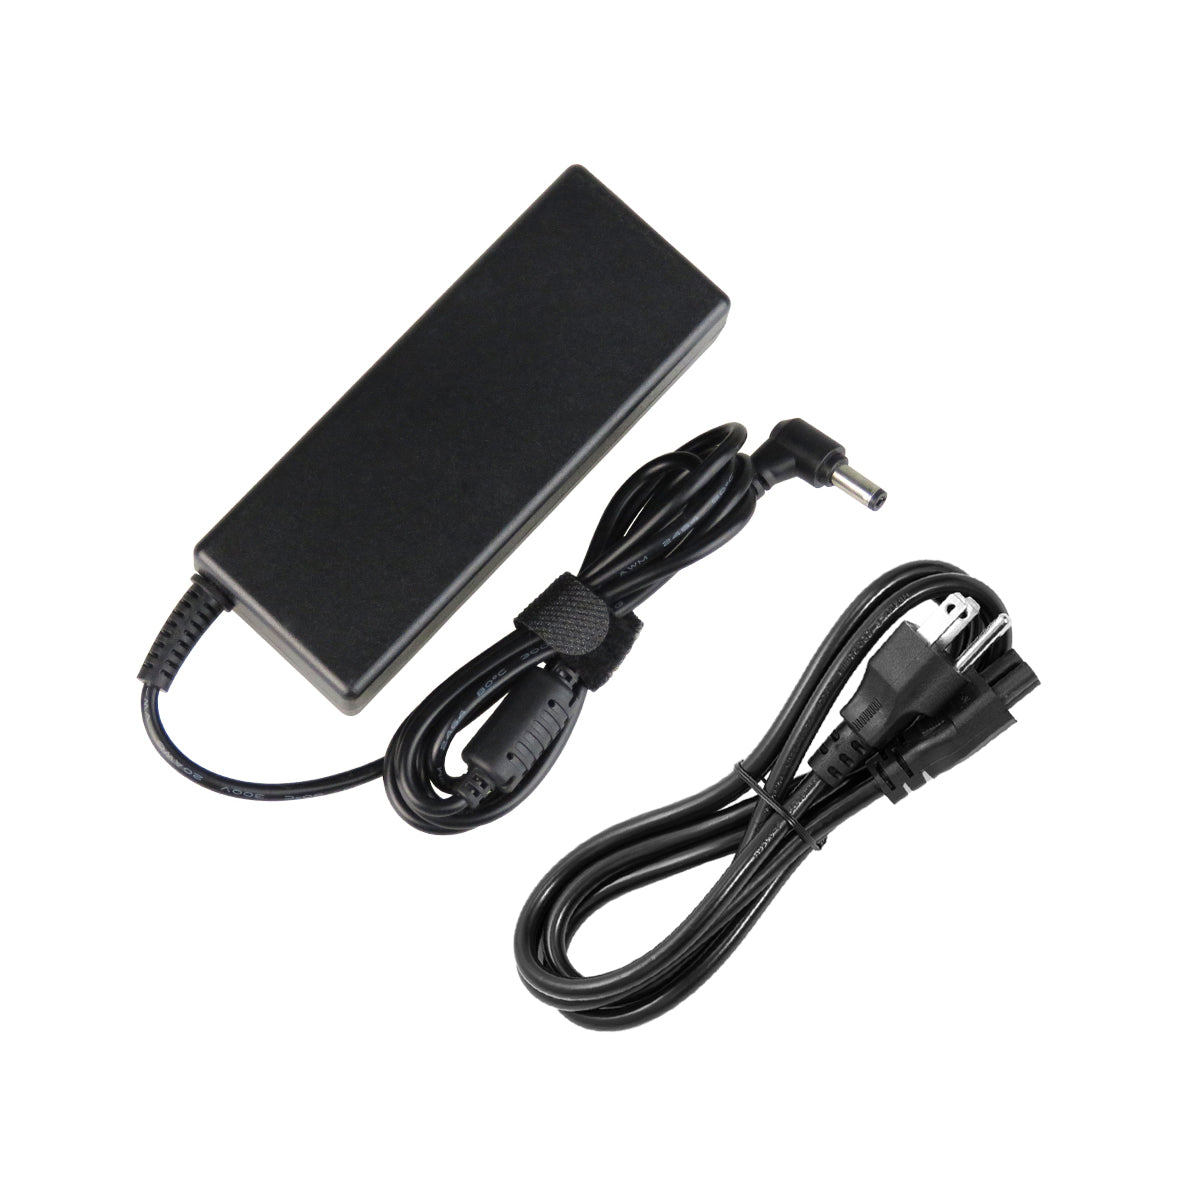 AC Adapter Charger for ASUS P42 Notebook.